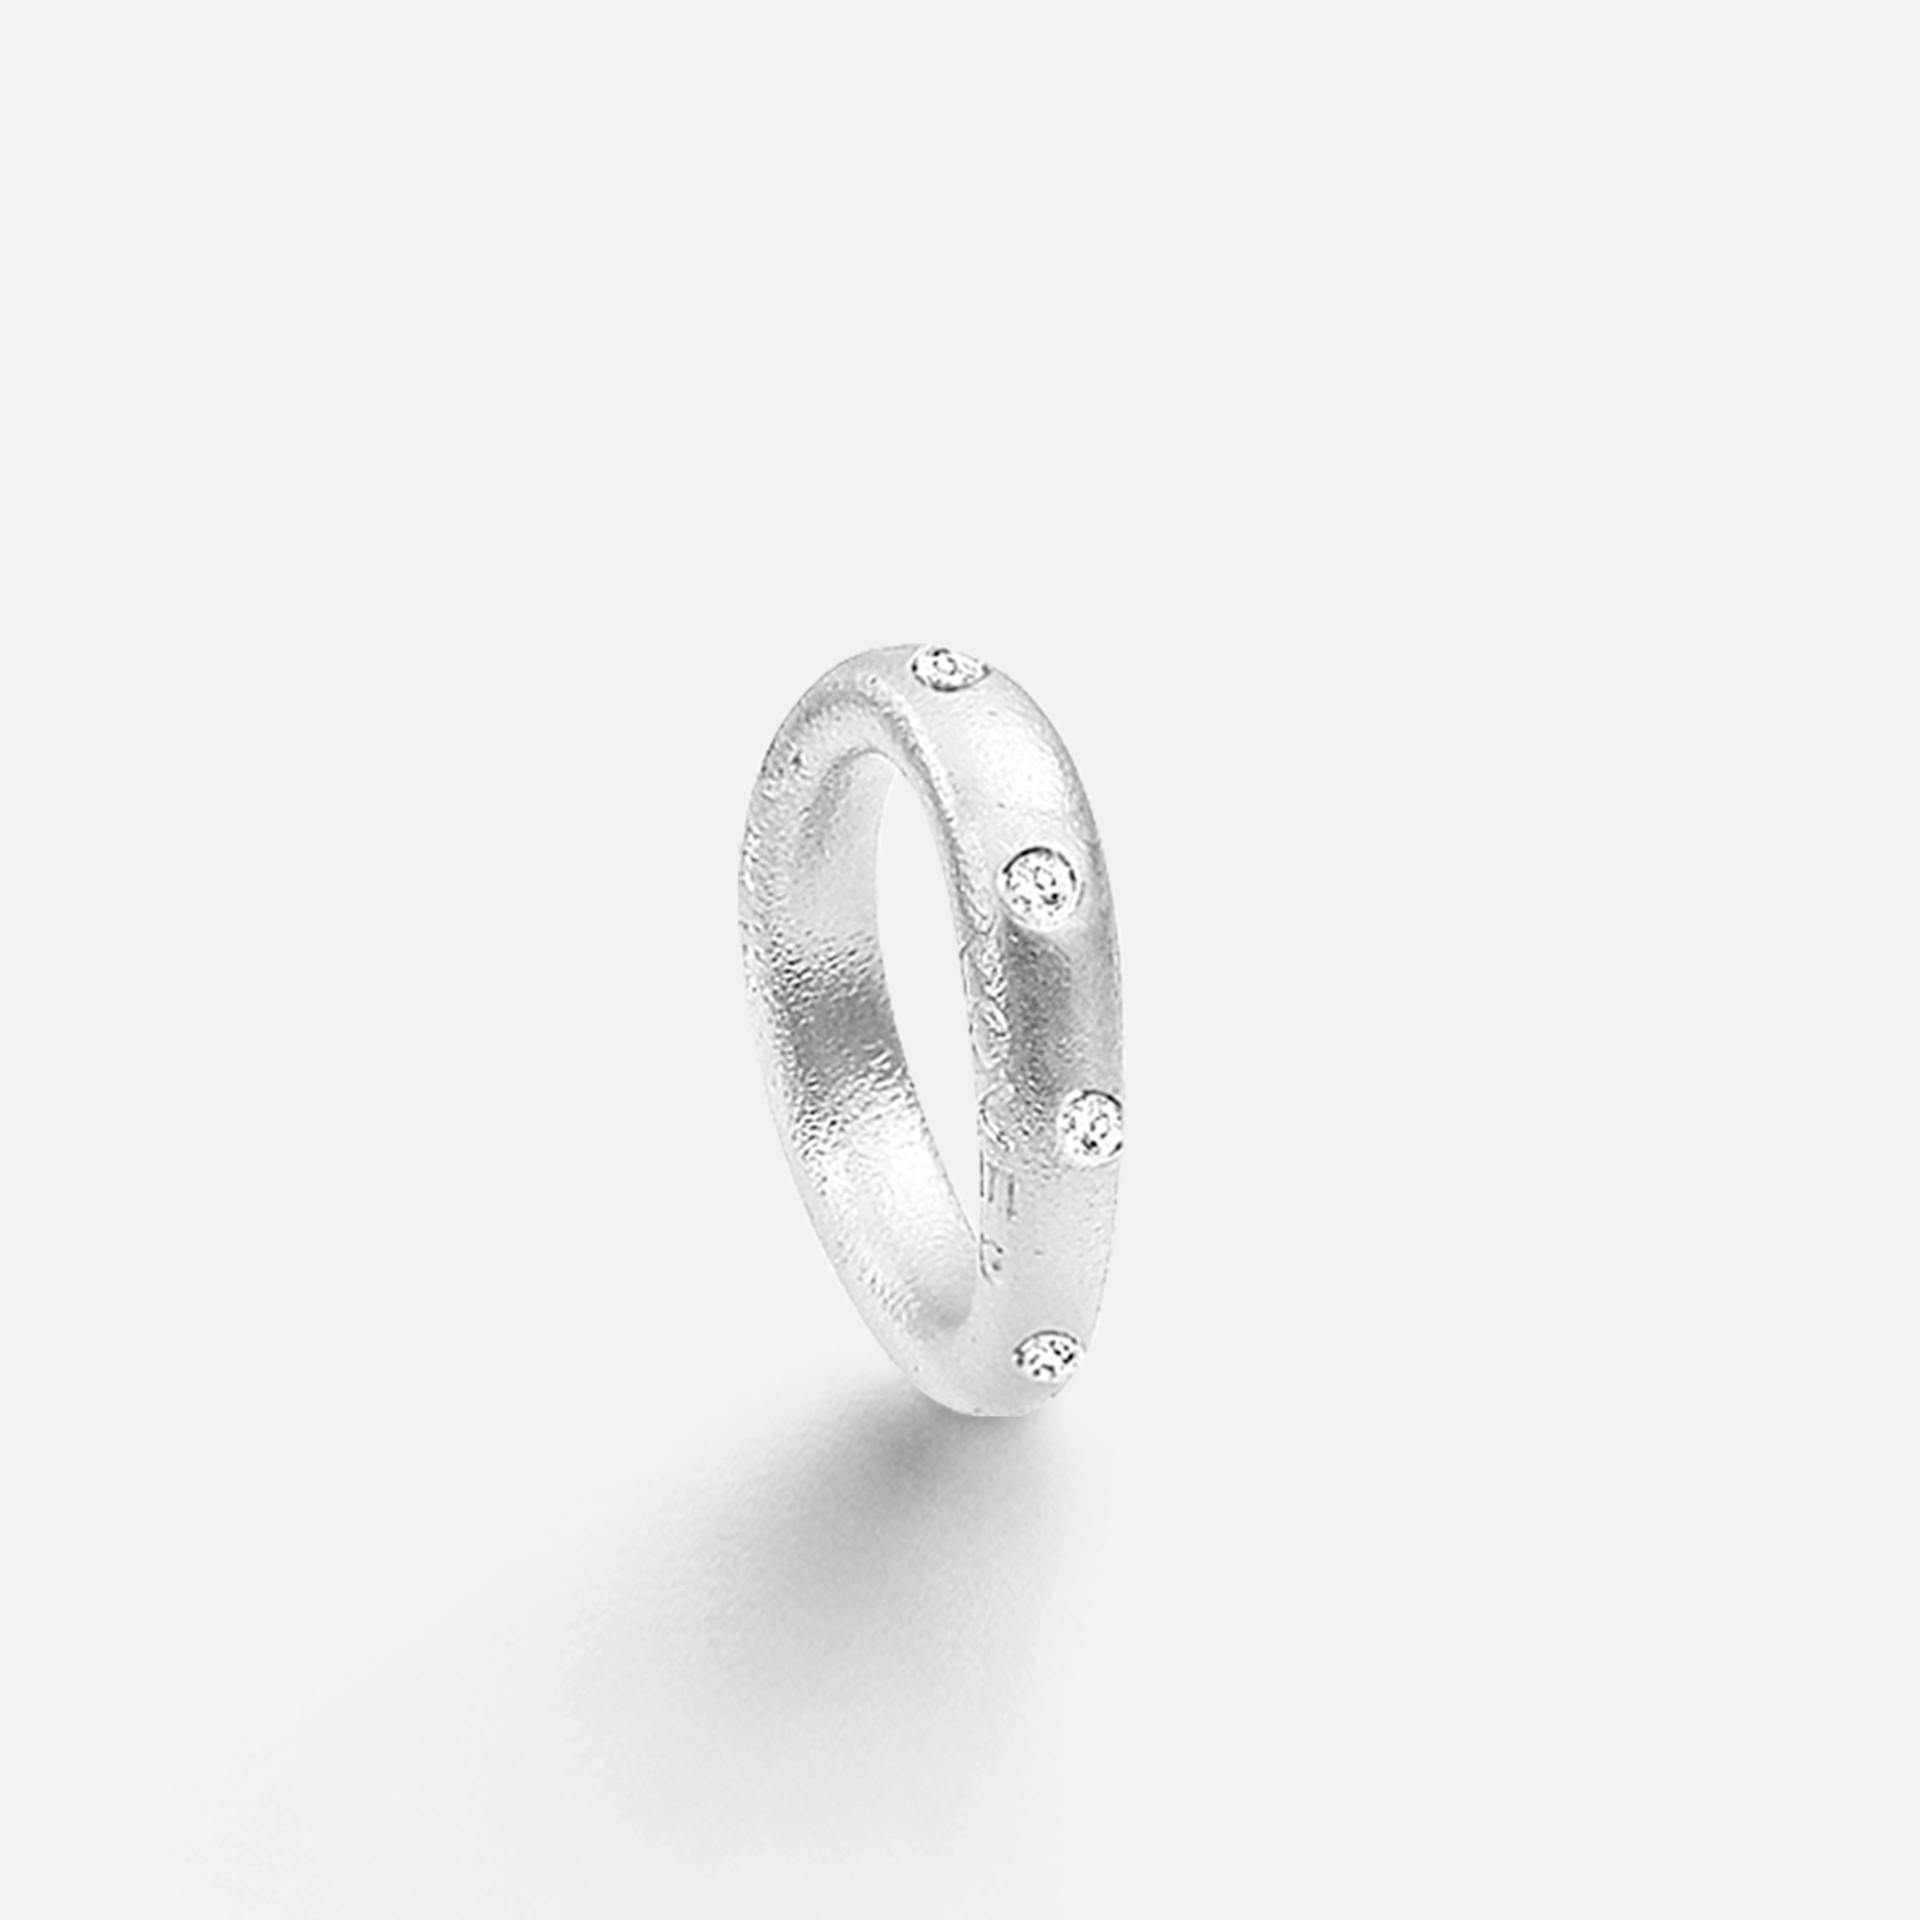 Love ring 4 18k white gold textured and diamonds 0.18 ct. TW. VS.